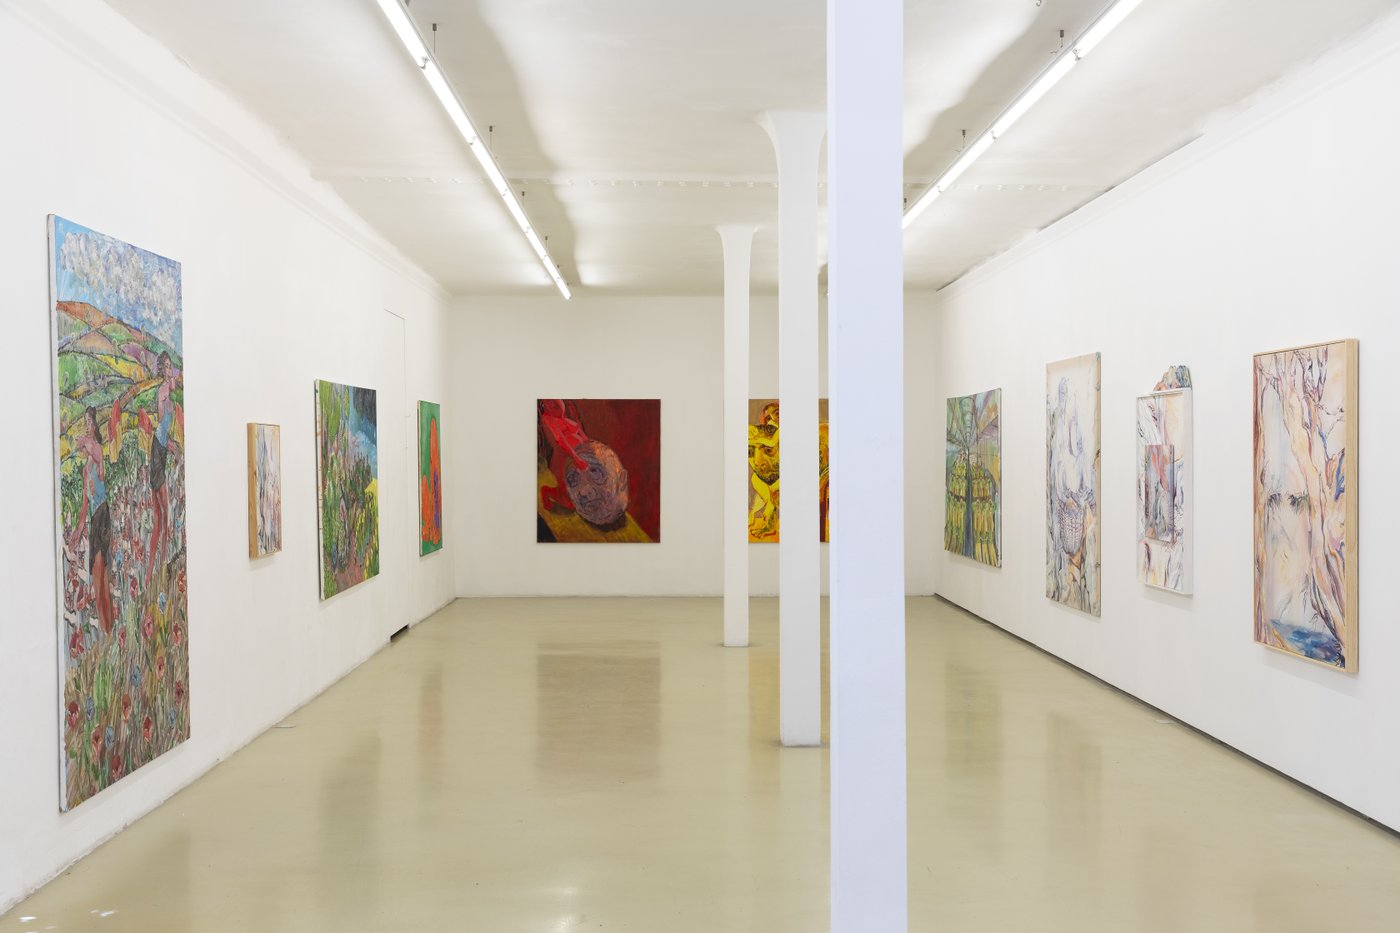 exhibition view with paintings